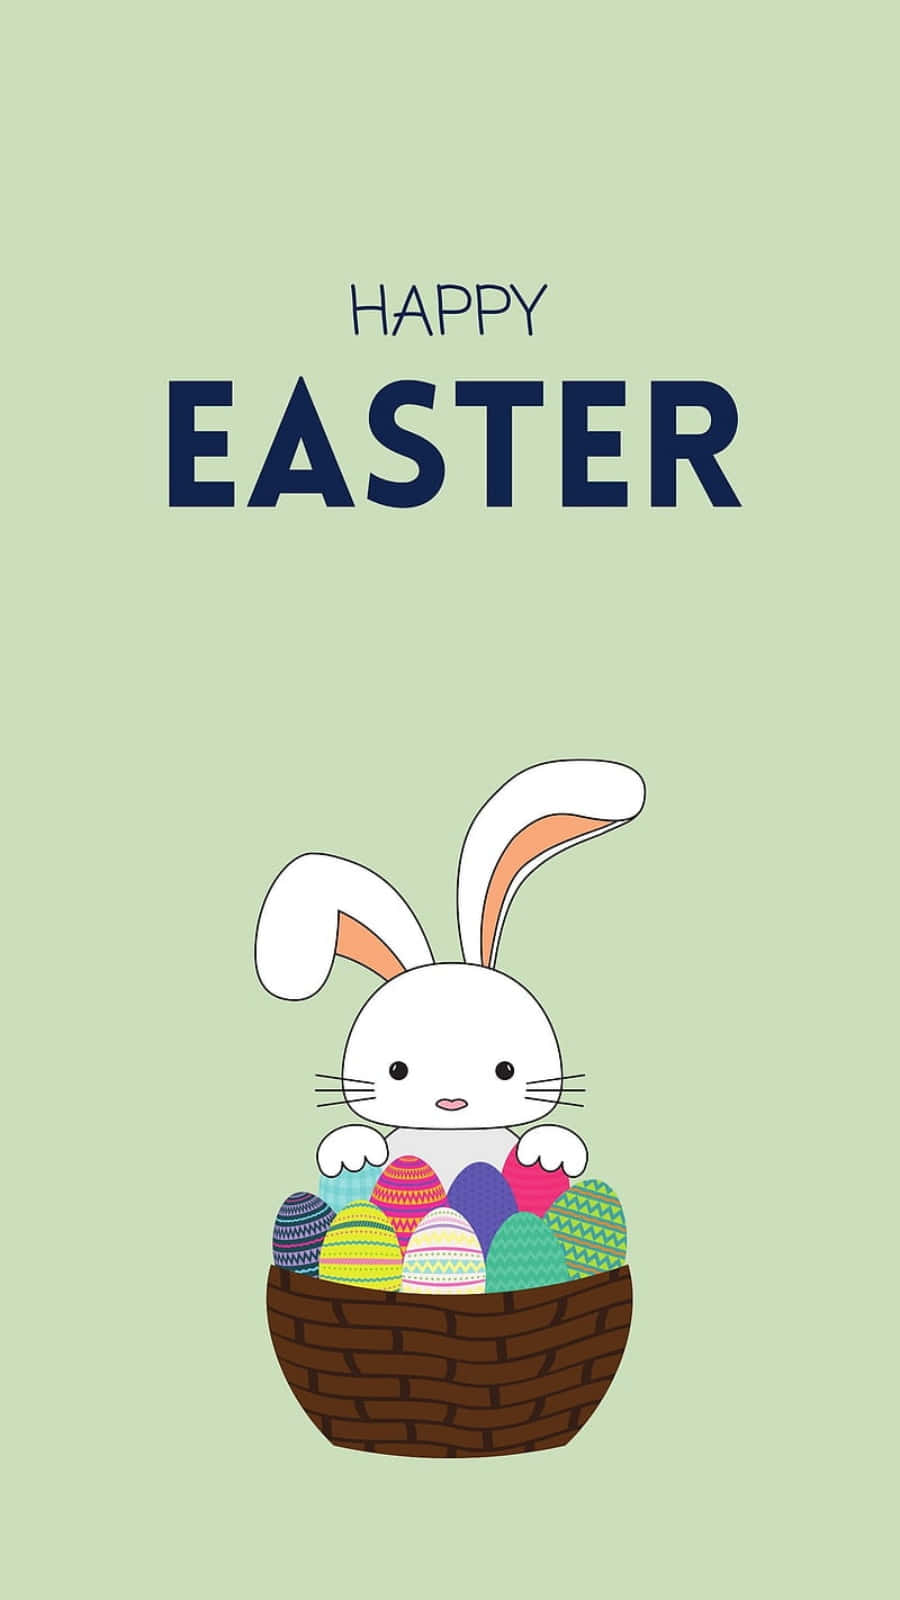 Celebrate Easter with Loved Ones!